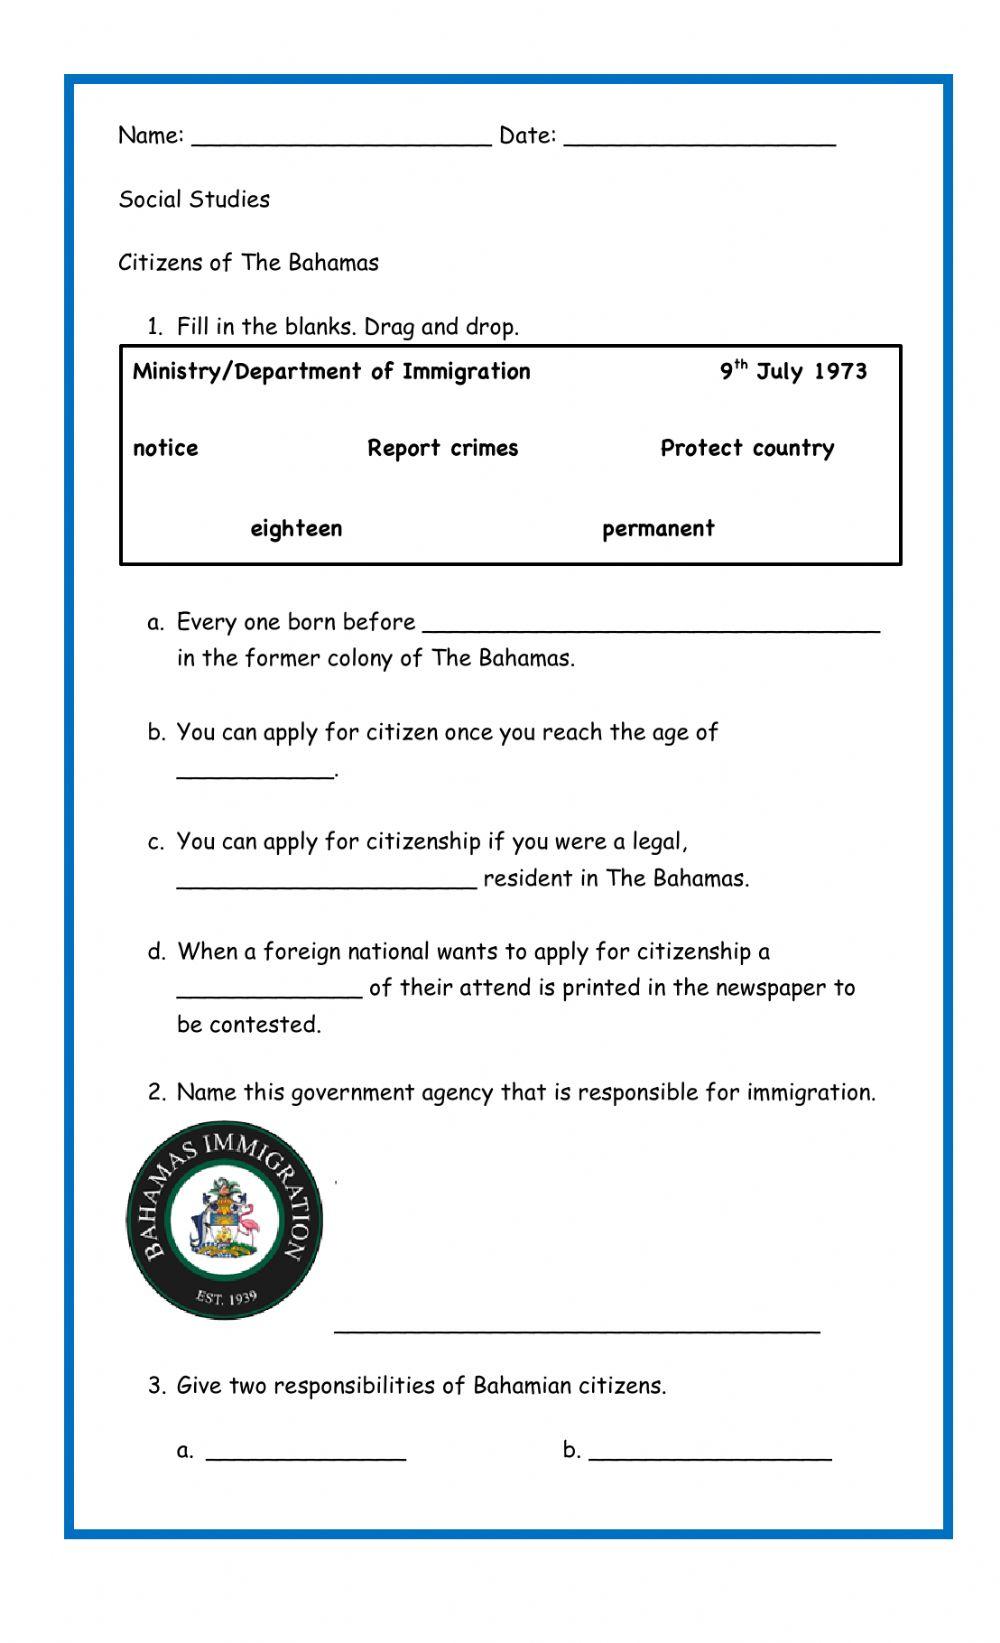 Citizens of The Bahamas (corrected)